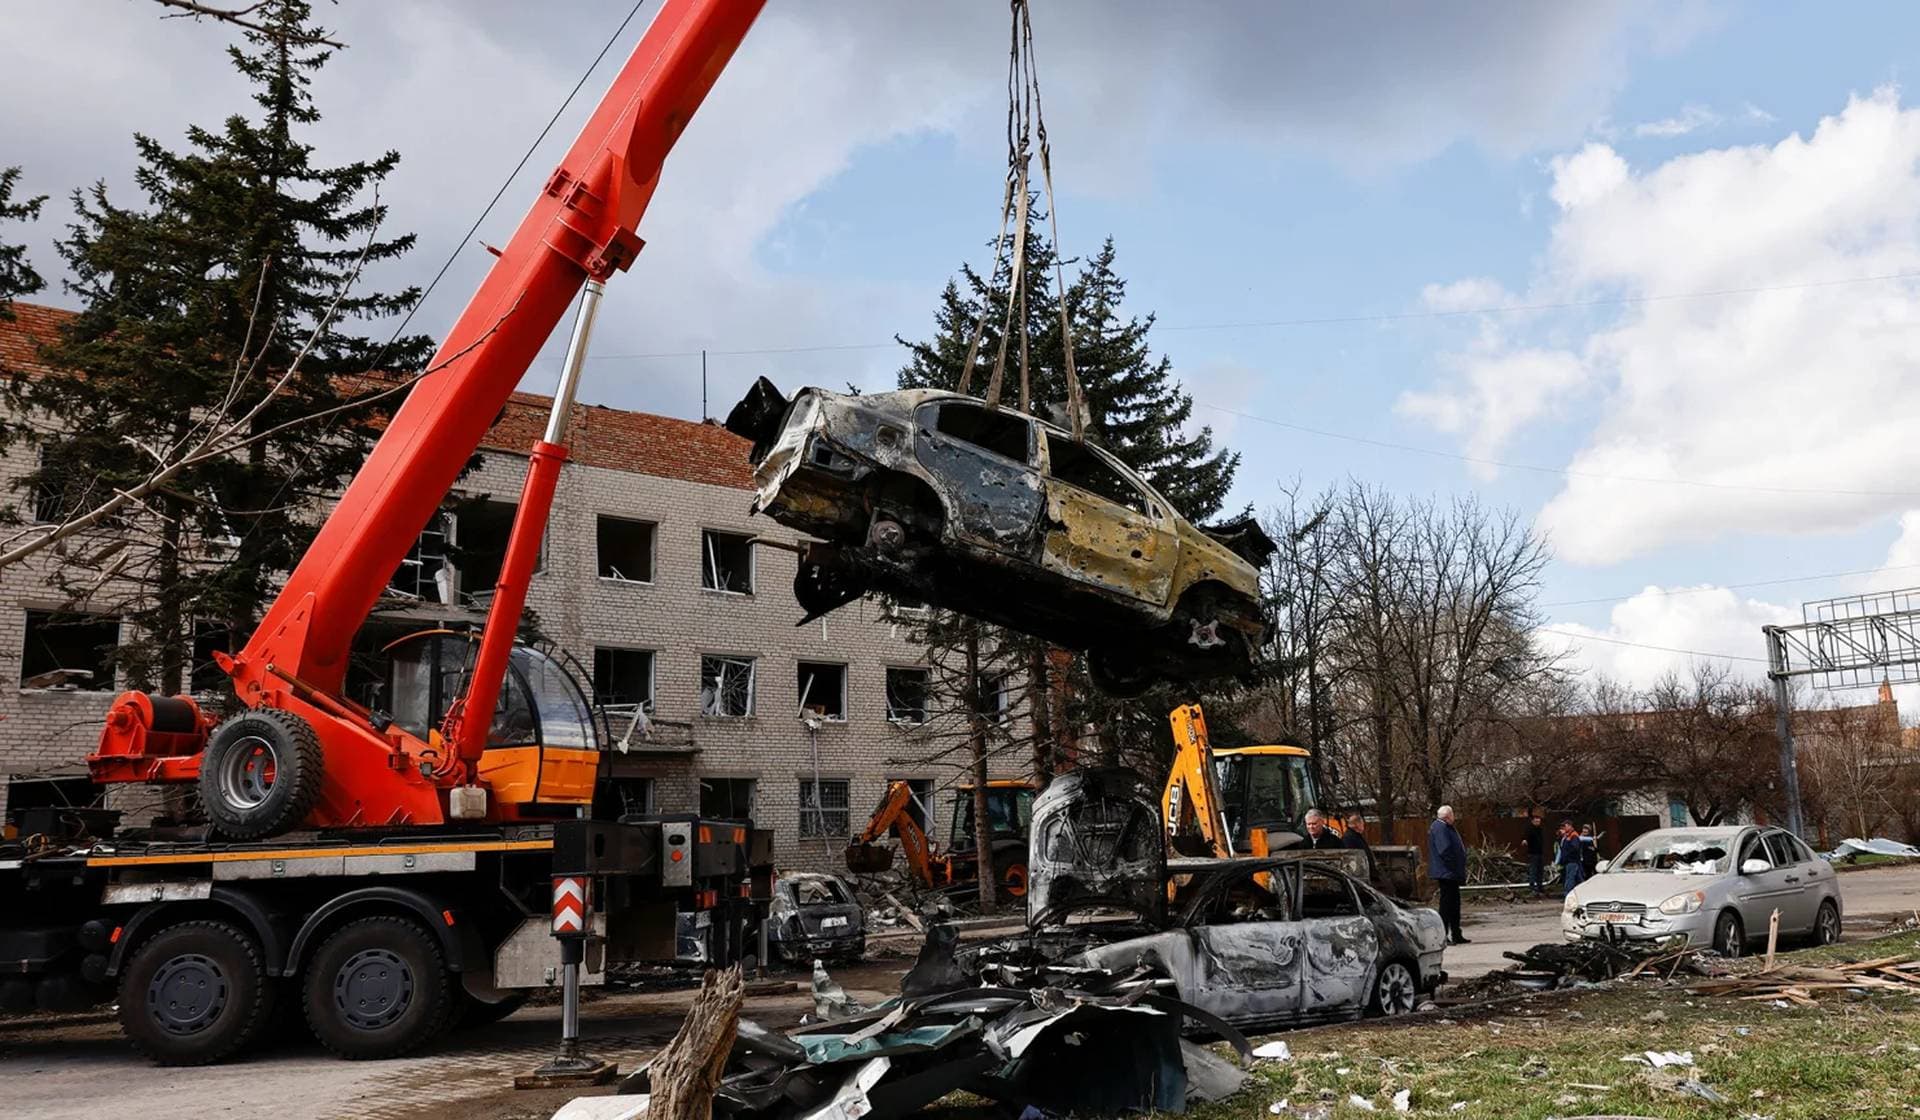 A crane lifts a damaged vehicle in the aftermath of deadly shelling of an army office building in Sloviansk